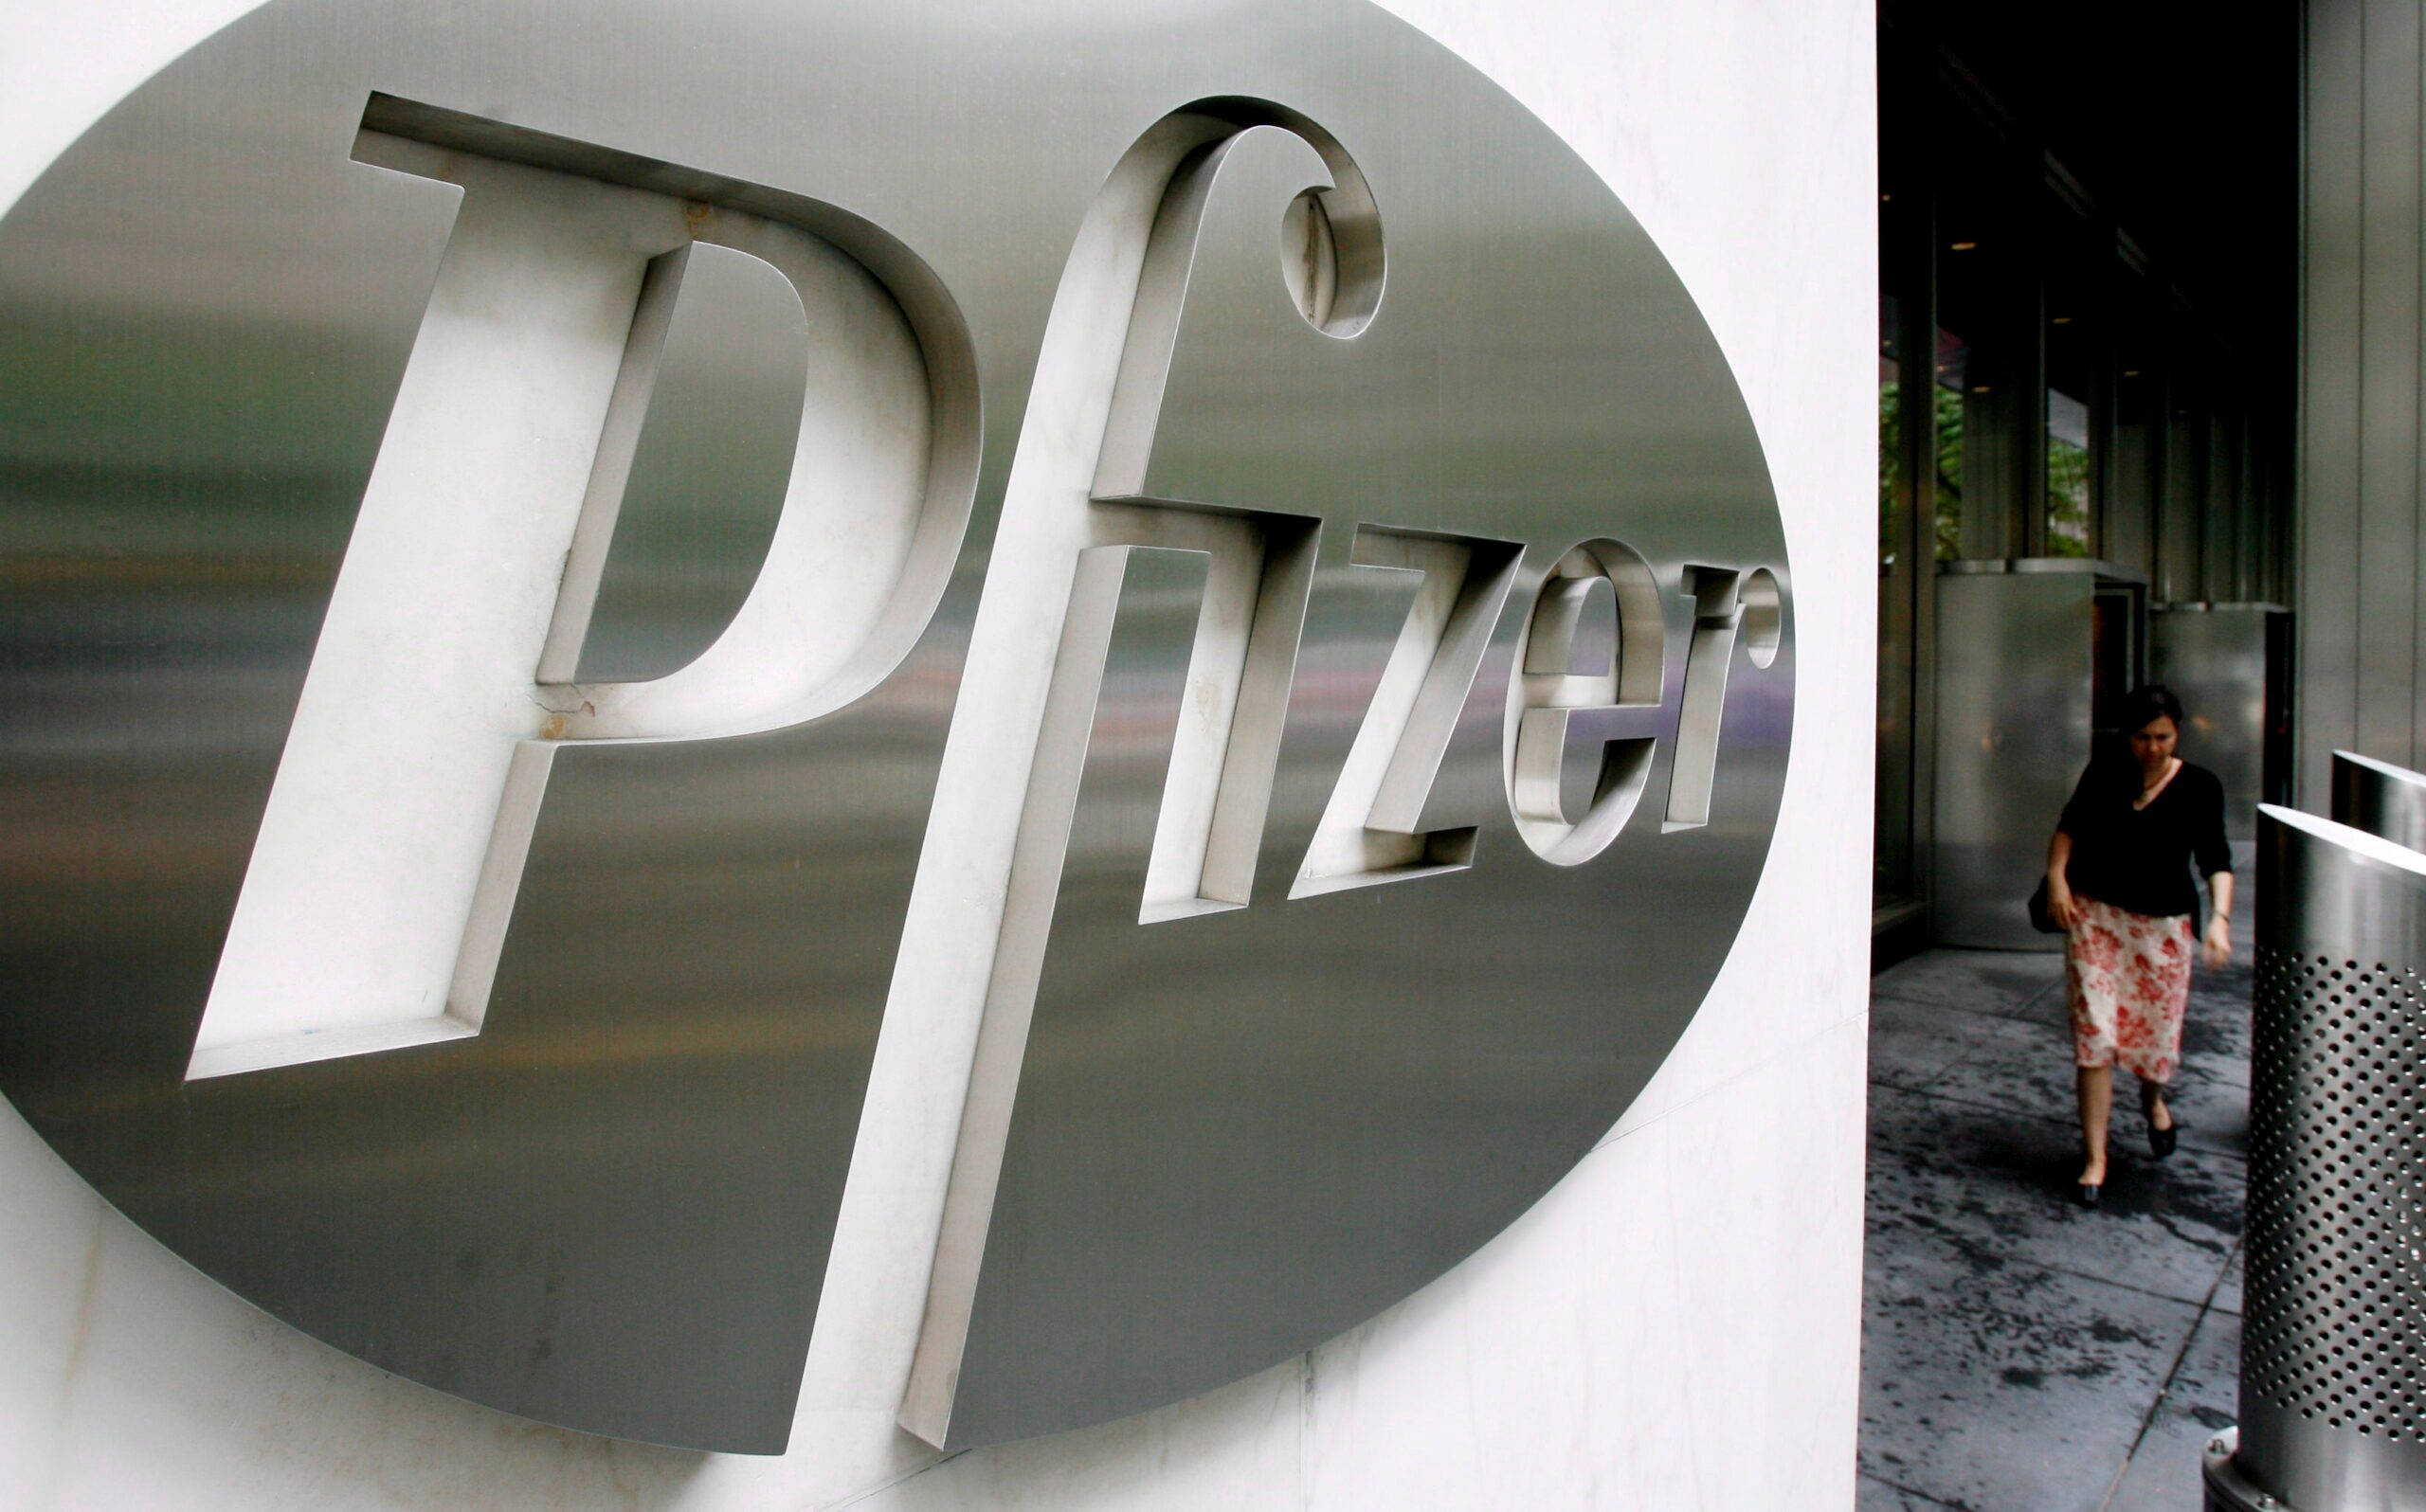 US signs $2 billion vaccine deal with Pfizer and BioNTech